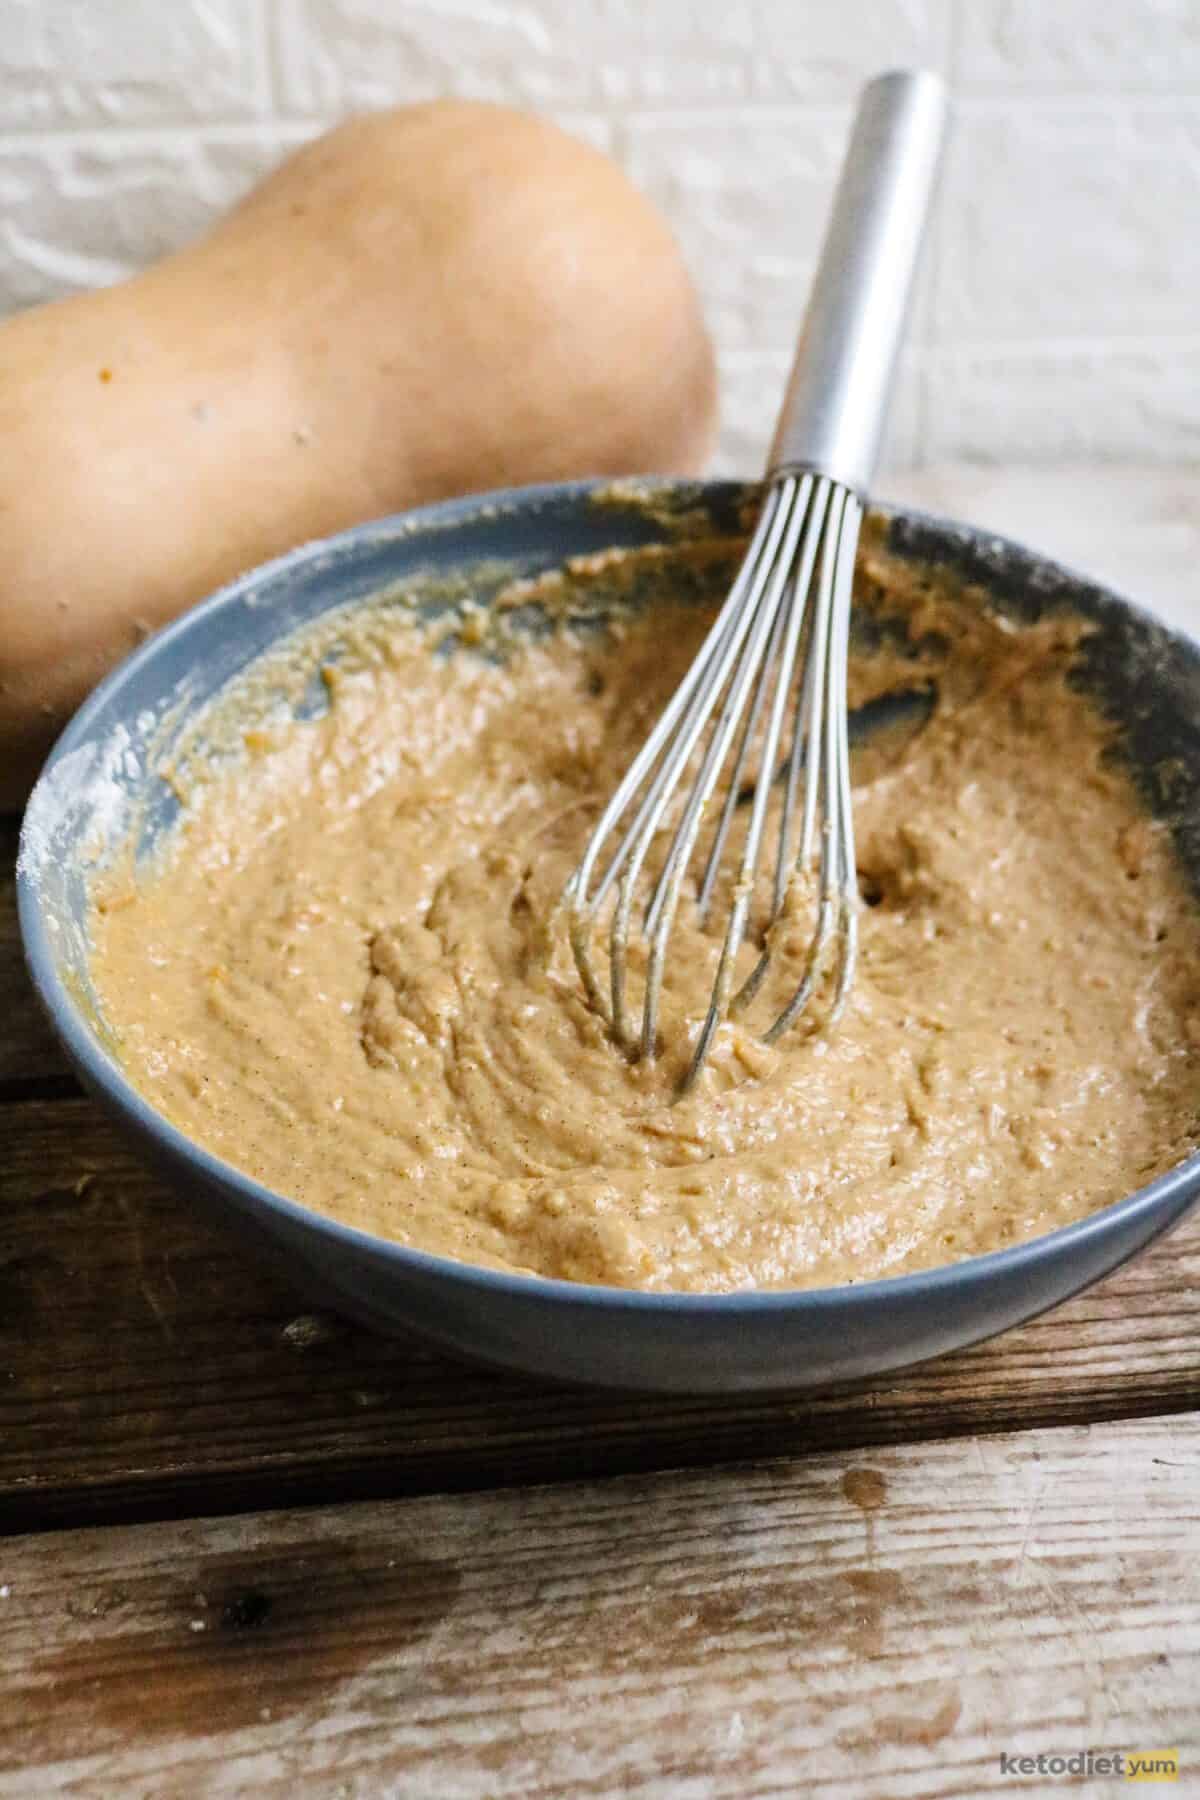 A mixing bowl filled with keto pumpkin bread batter ready to transfer to a lined baking loaf pan